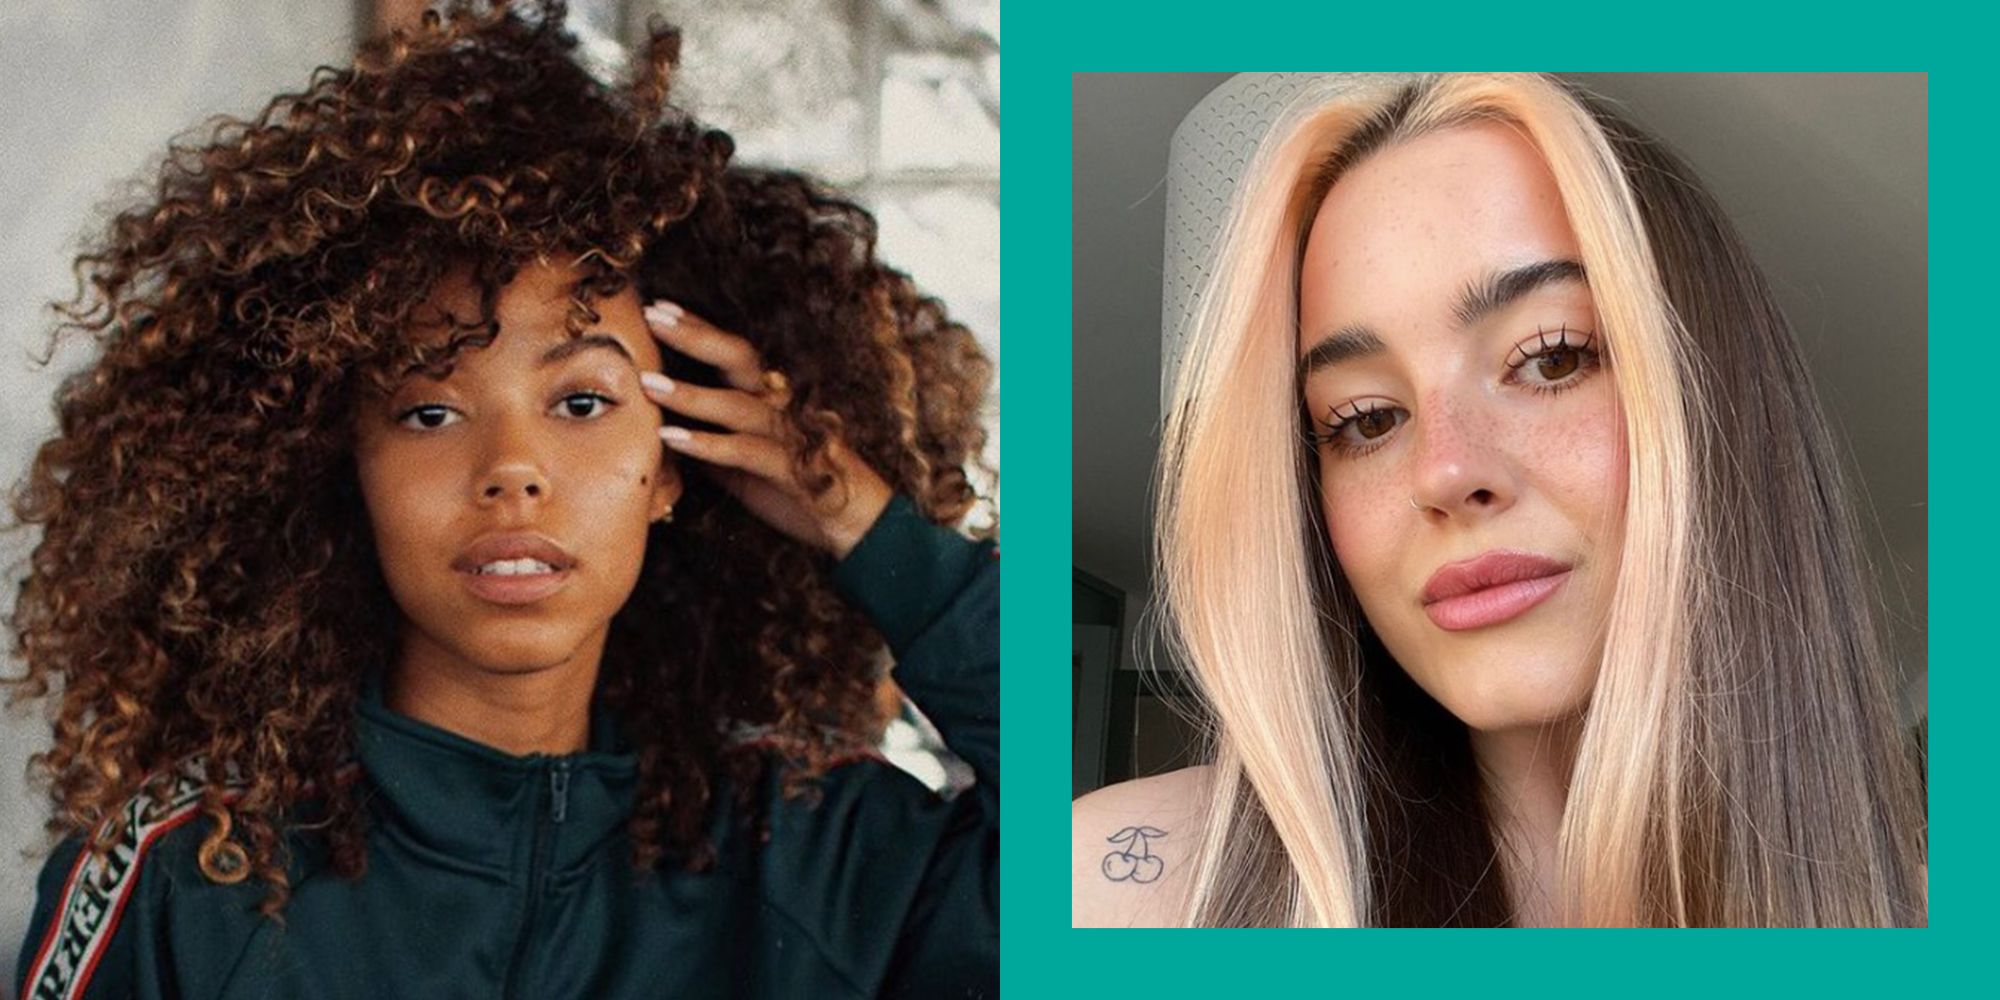 The 7 Best Winter Hair Colors to Try